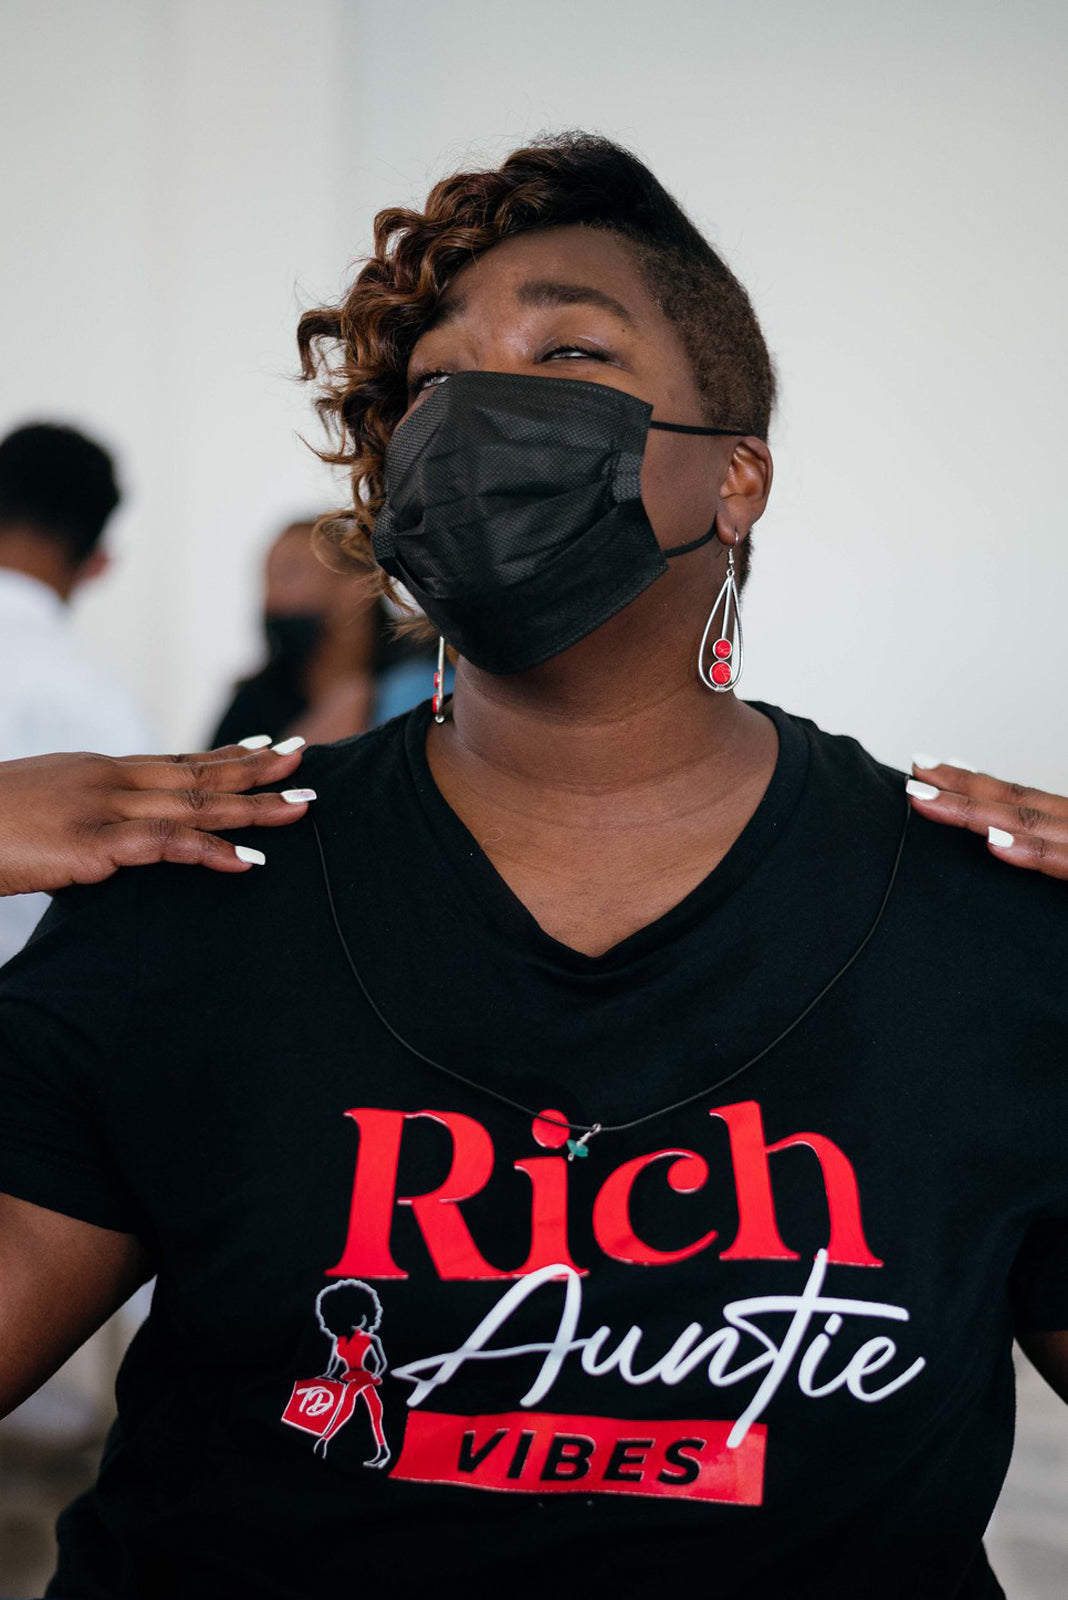 Black woman wearing black face mask and black t-shirt that says 